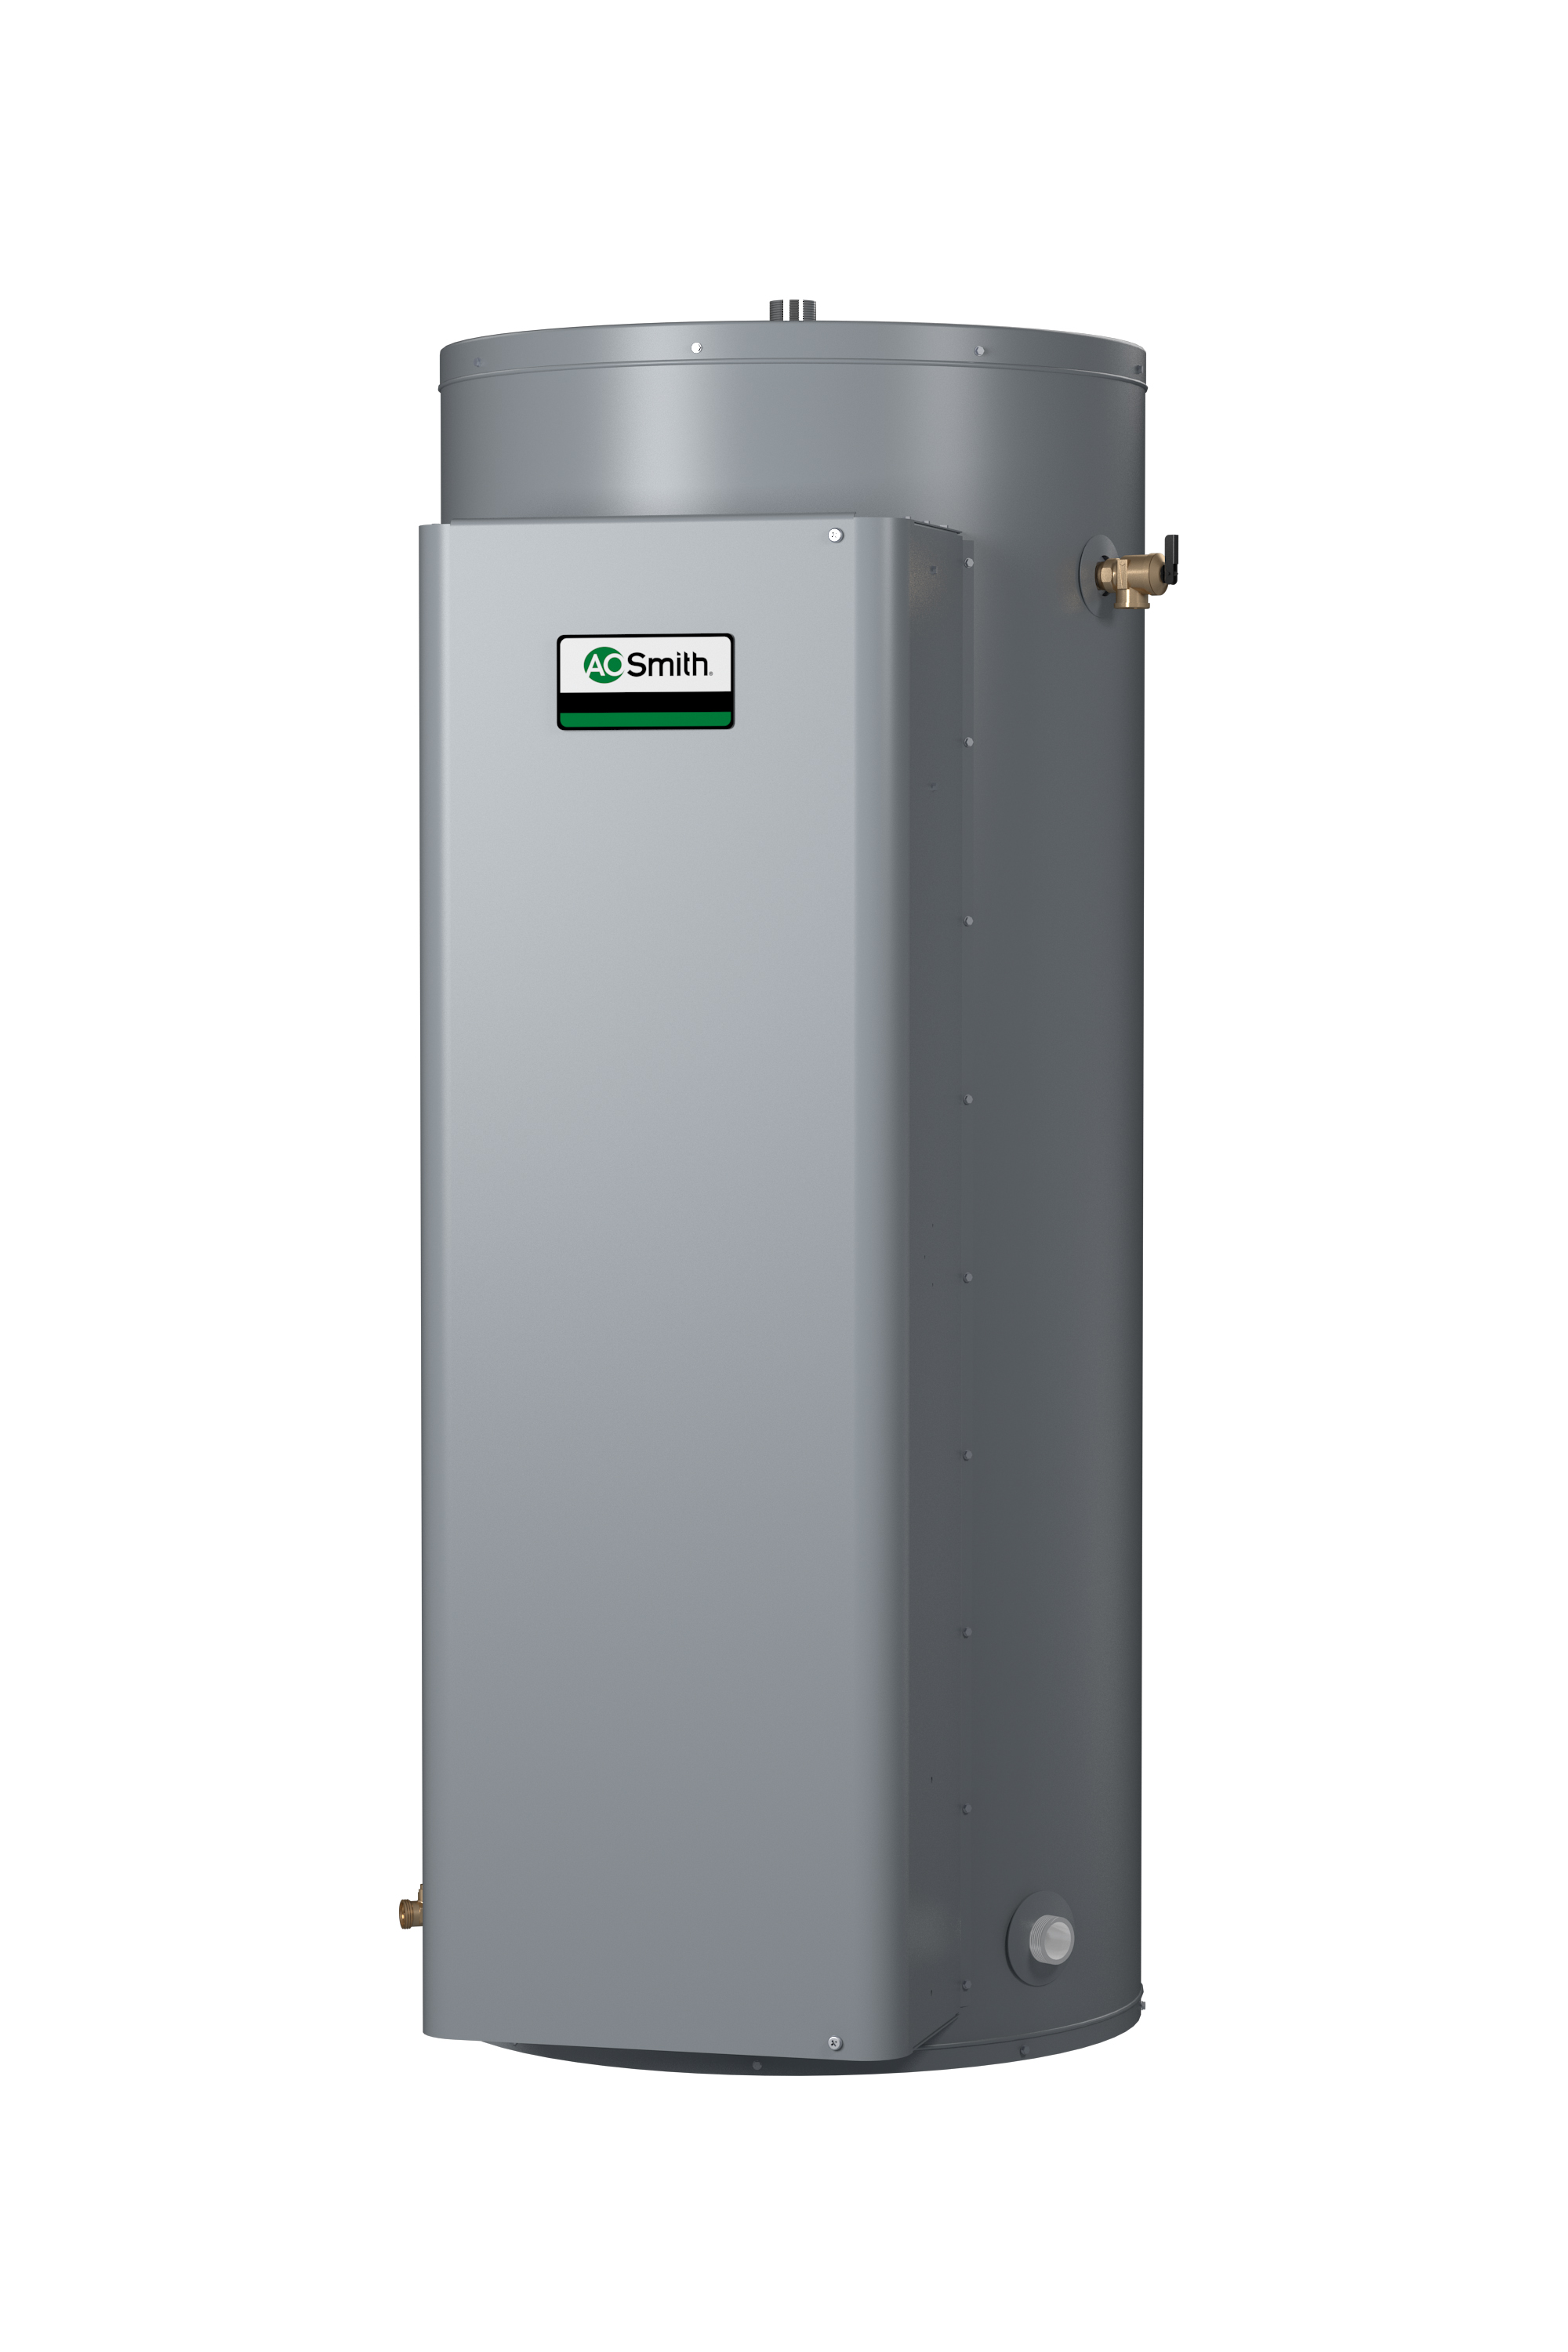 AO SMITH DVE-120-13.5, 119 GALLONS, 13.5KW, 240 VOLT, 32.51 AMPS, 3 PHASE, 3 ELEMENT, GOLD Xi SERIES HEAVY DUTY COMMERCIAL ELECTRIC WATER HEATER